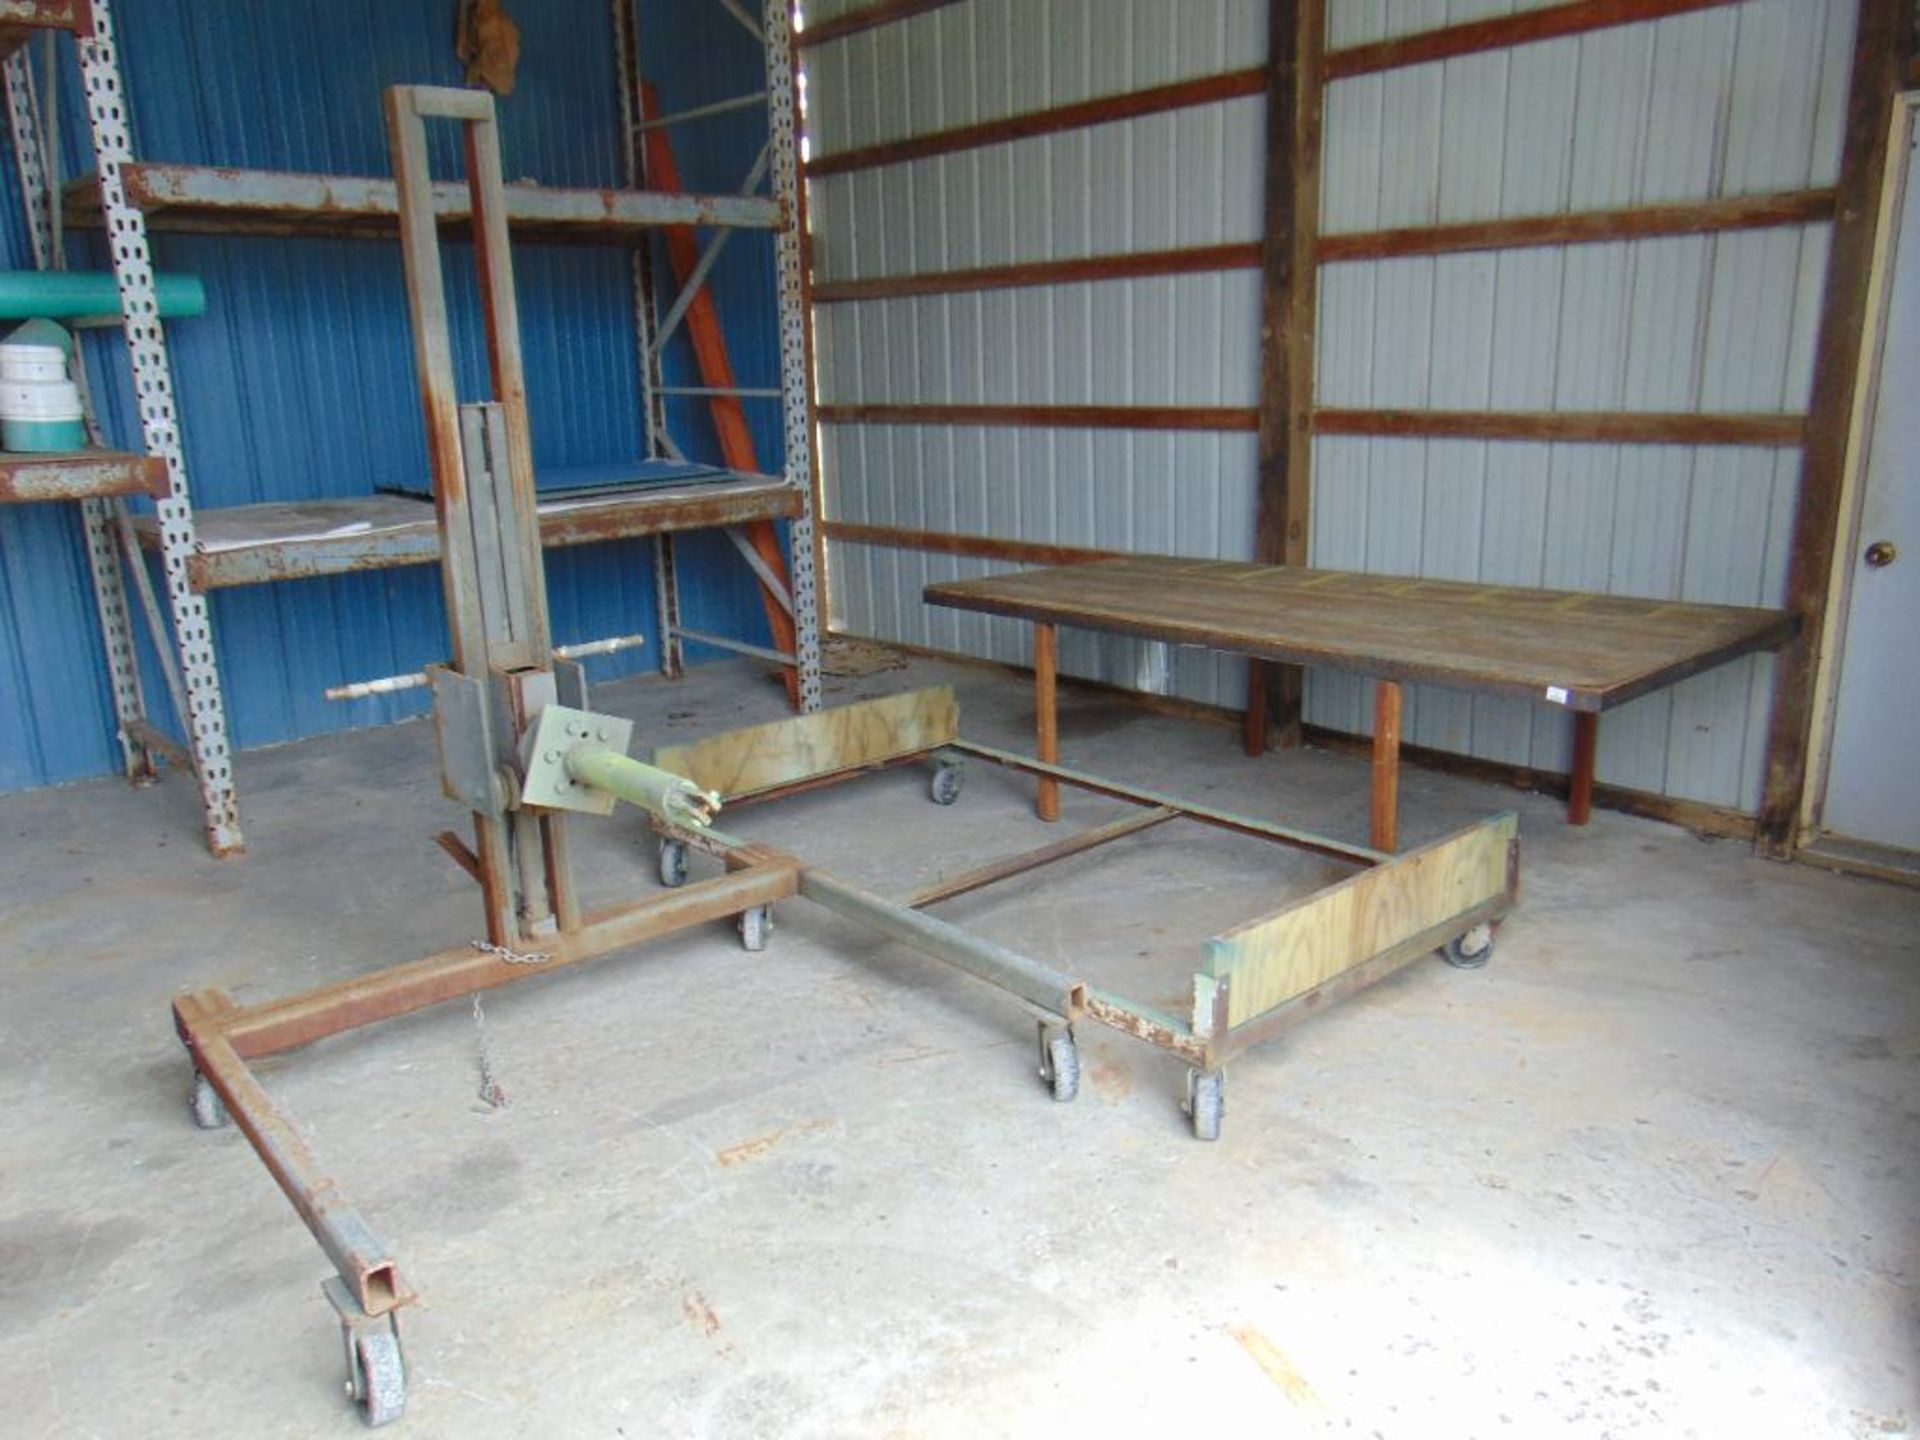 Steel Table, Cart, and Flipper*